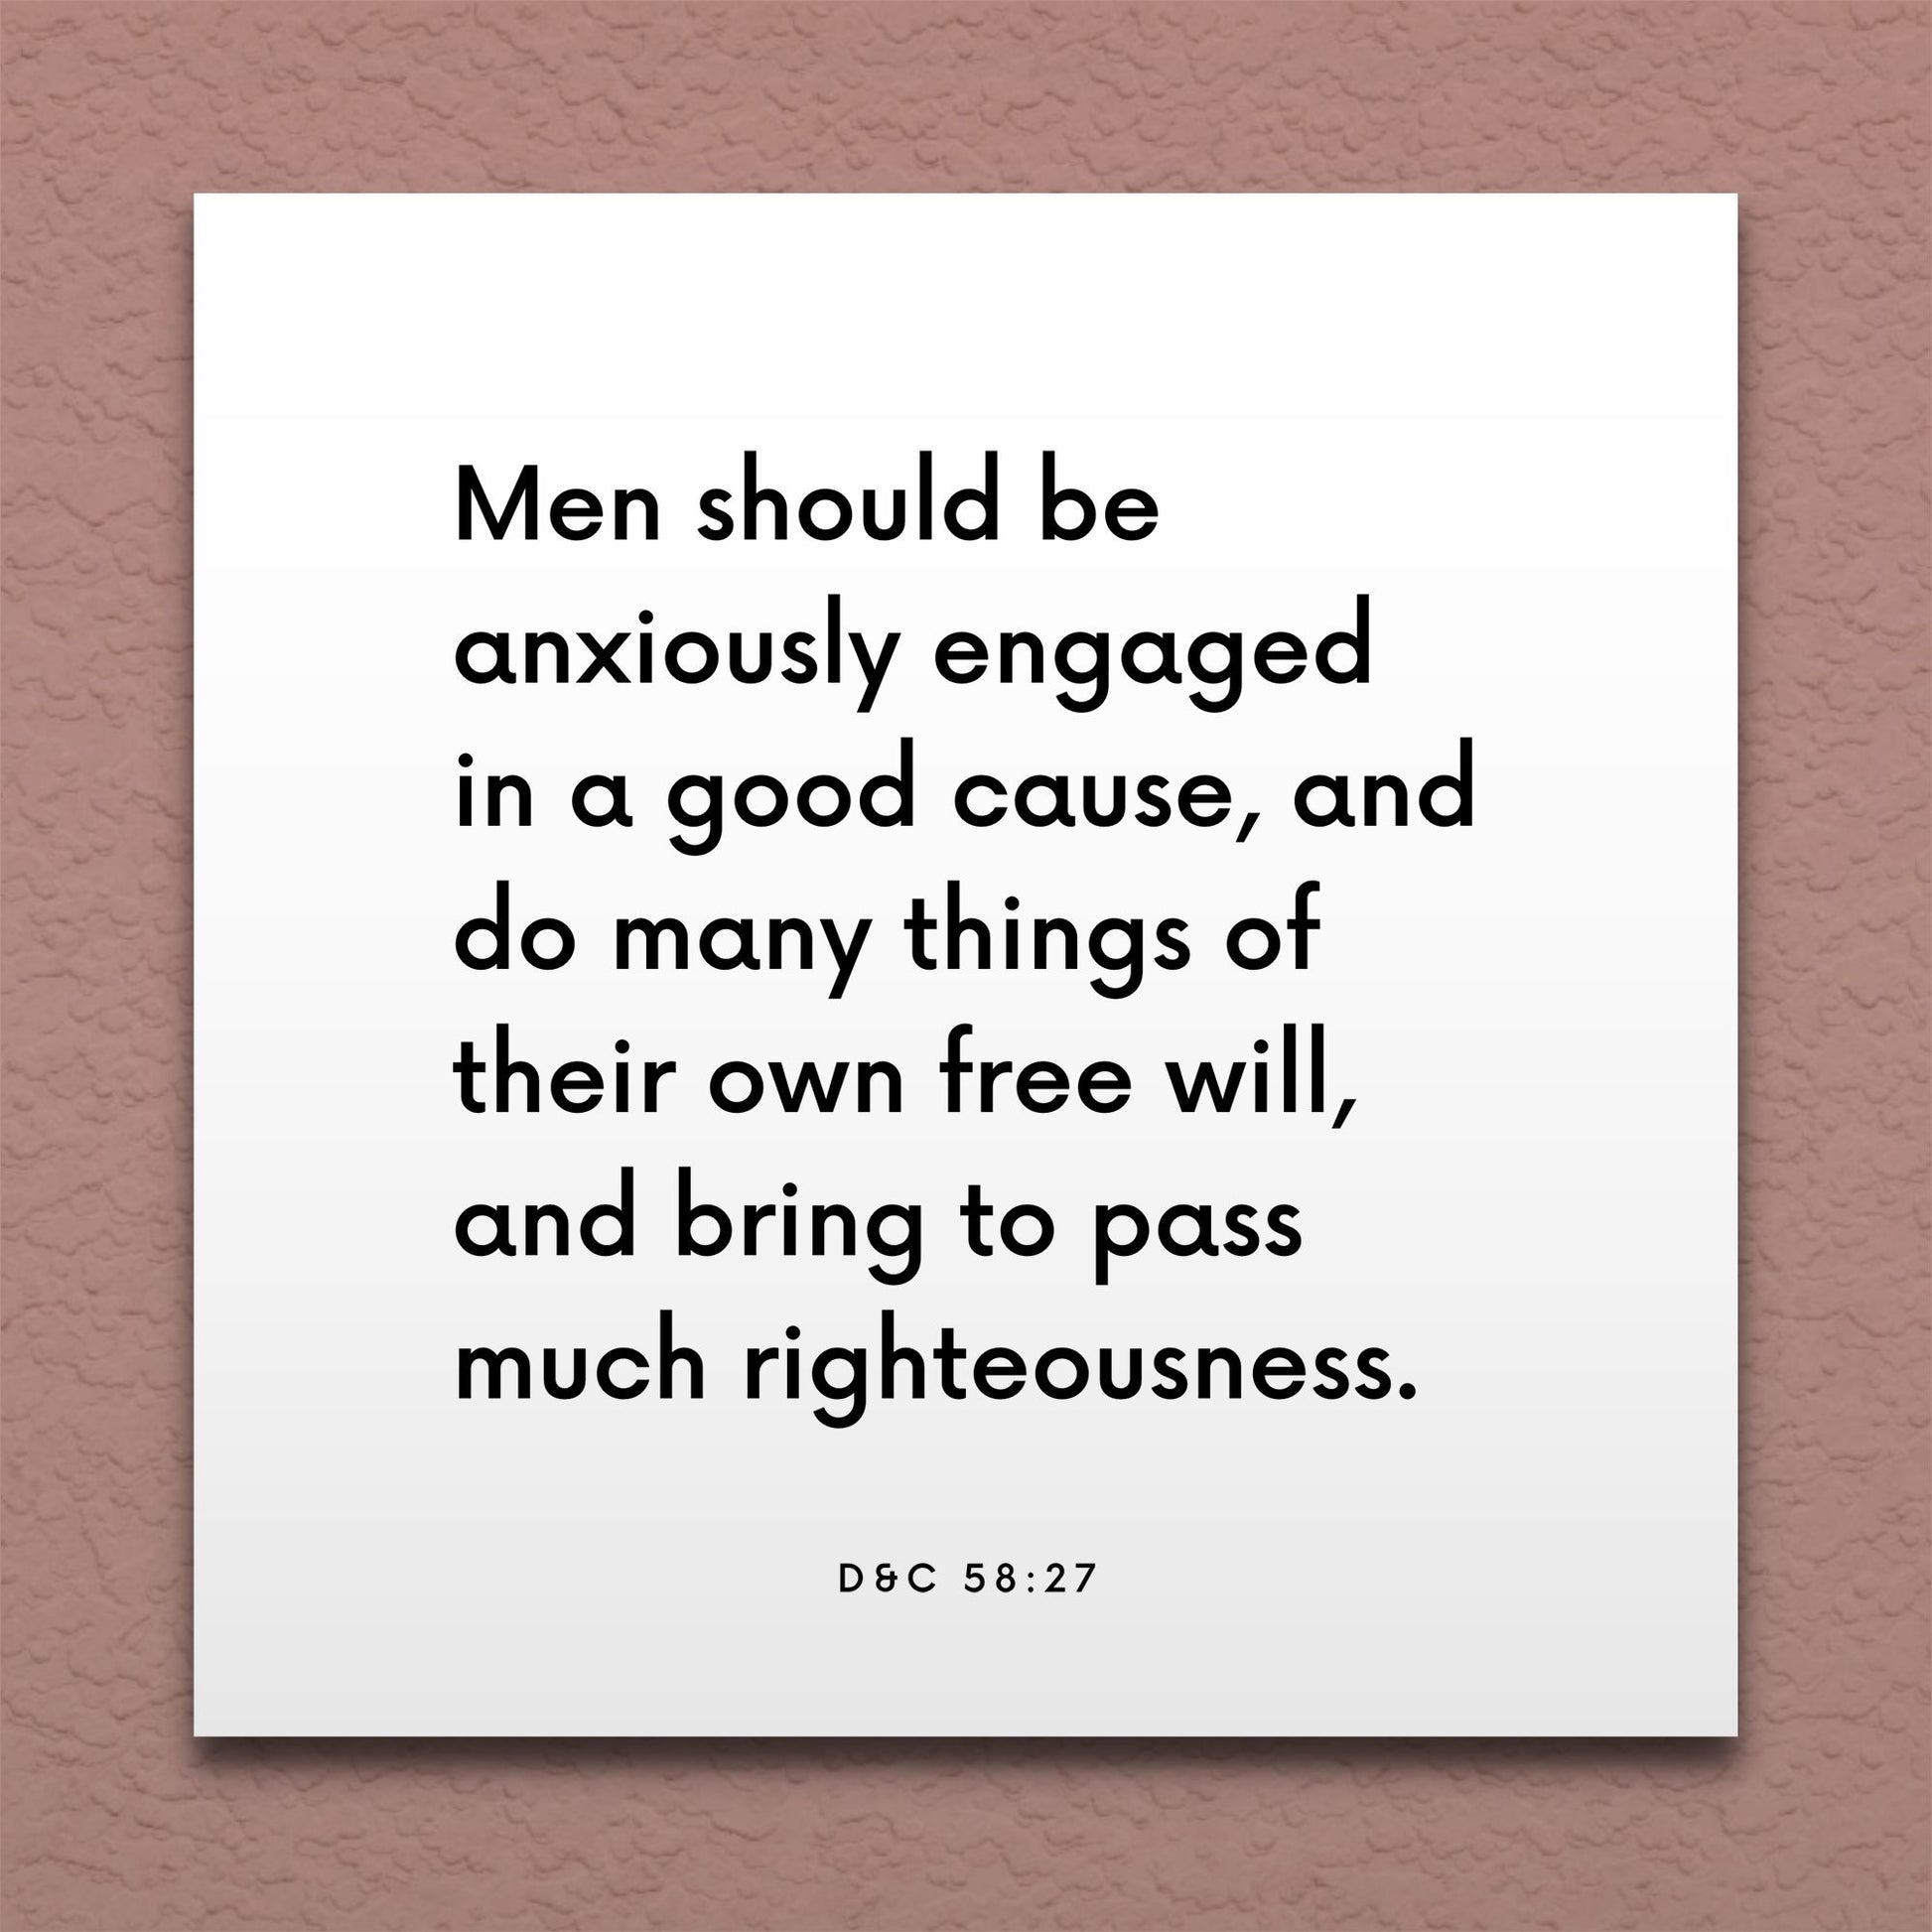 Wall-mounted scripture tile for D&C 58:27 - "Men should be anxiously engaged in a good cause"